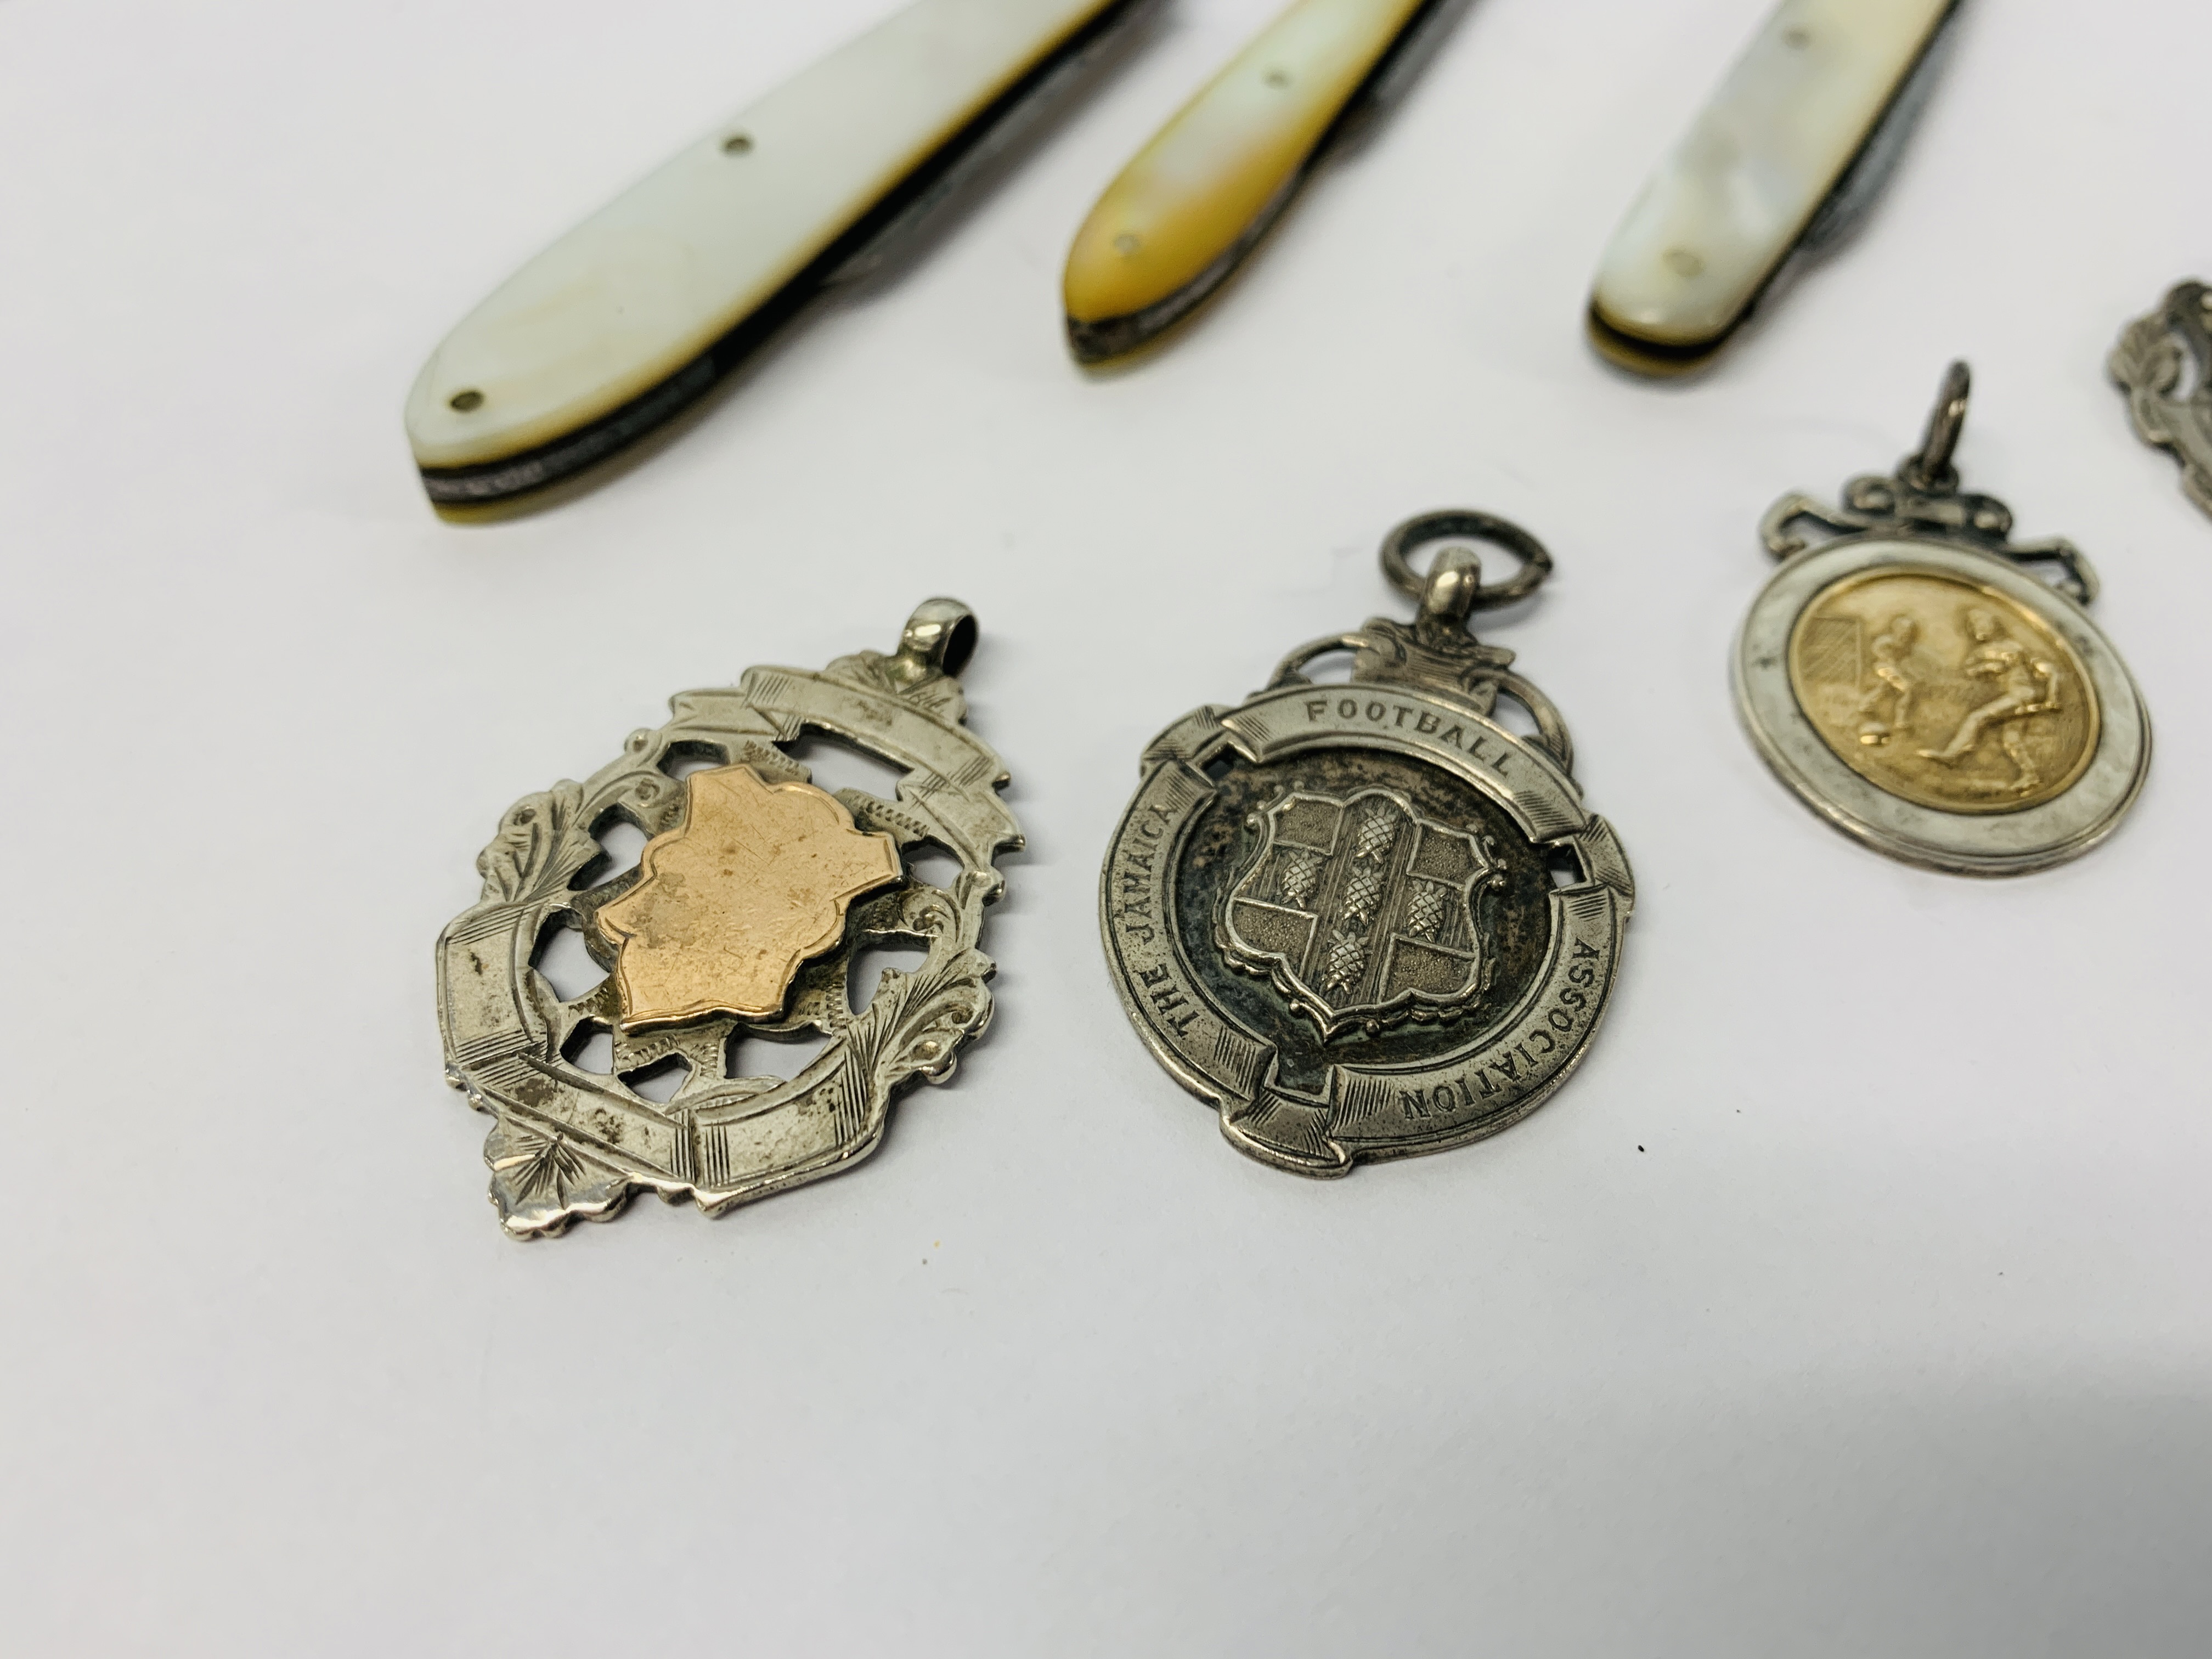 THREE MOTHER OF PEARL HANDLED FRUIT KNIVES AND FOUR SILVER FOOTBALL MEDALS - Image 2 of 6